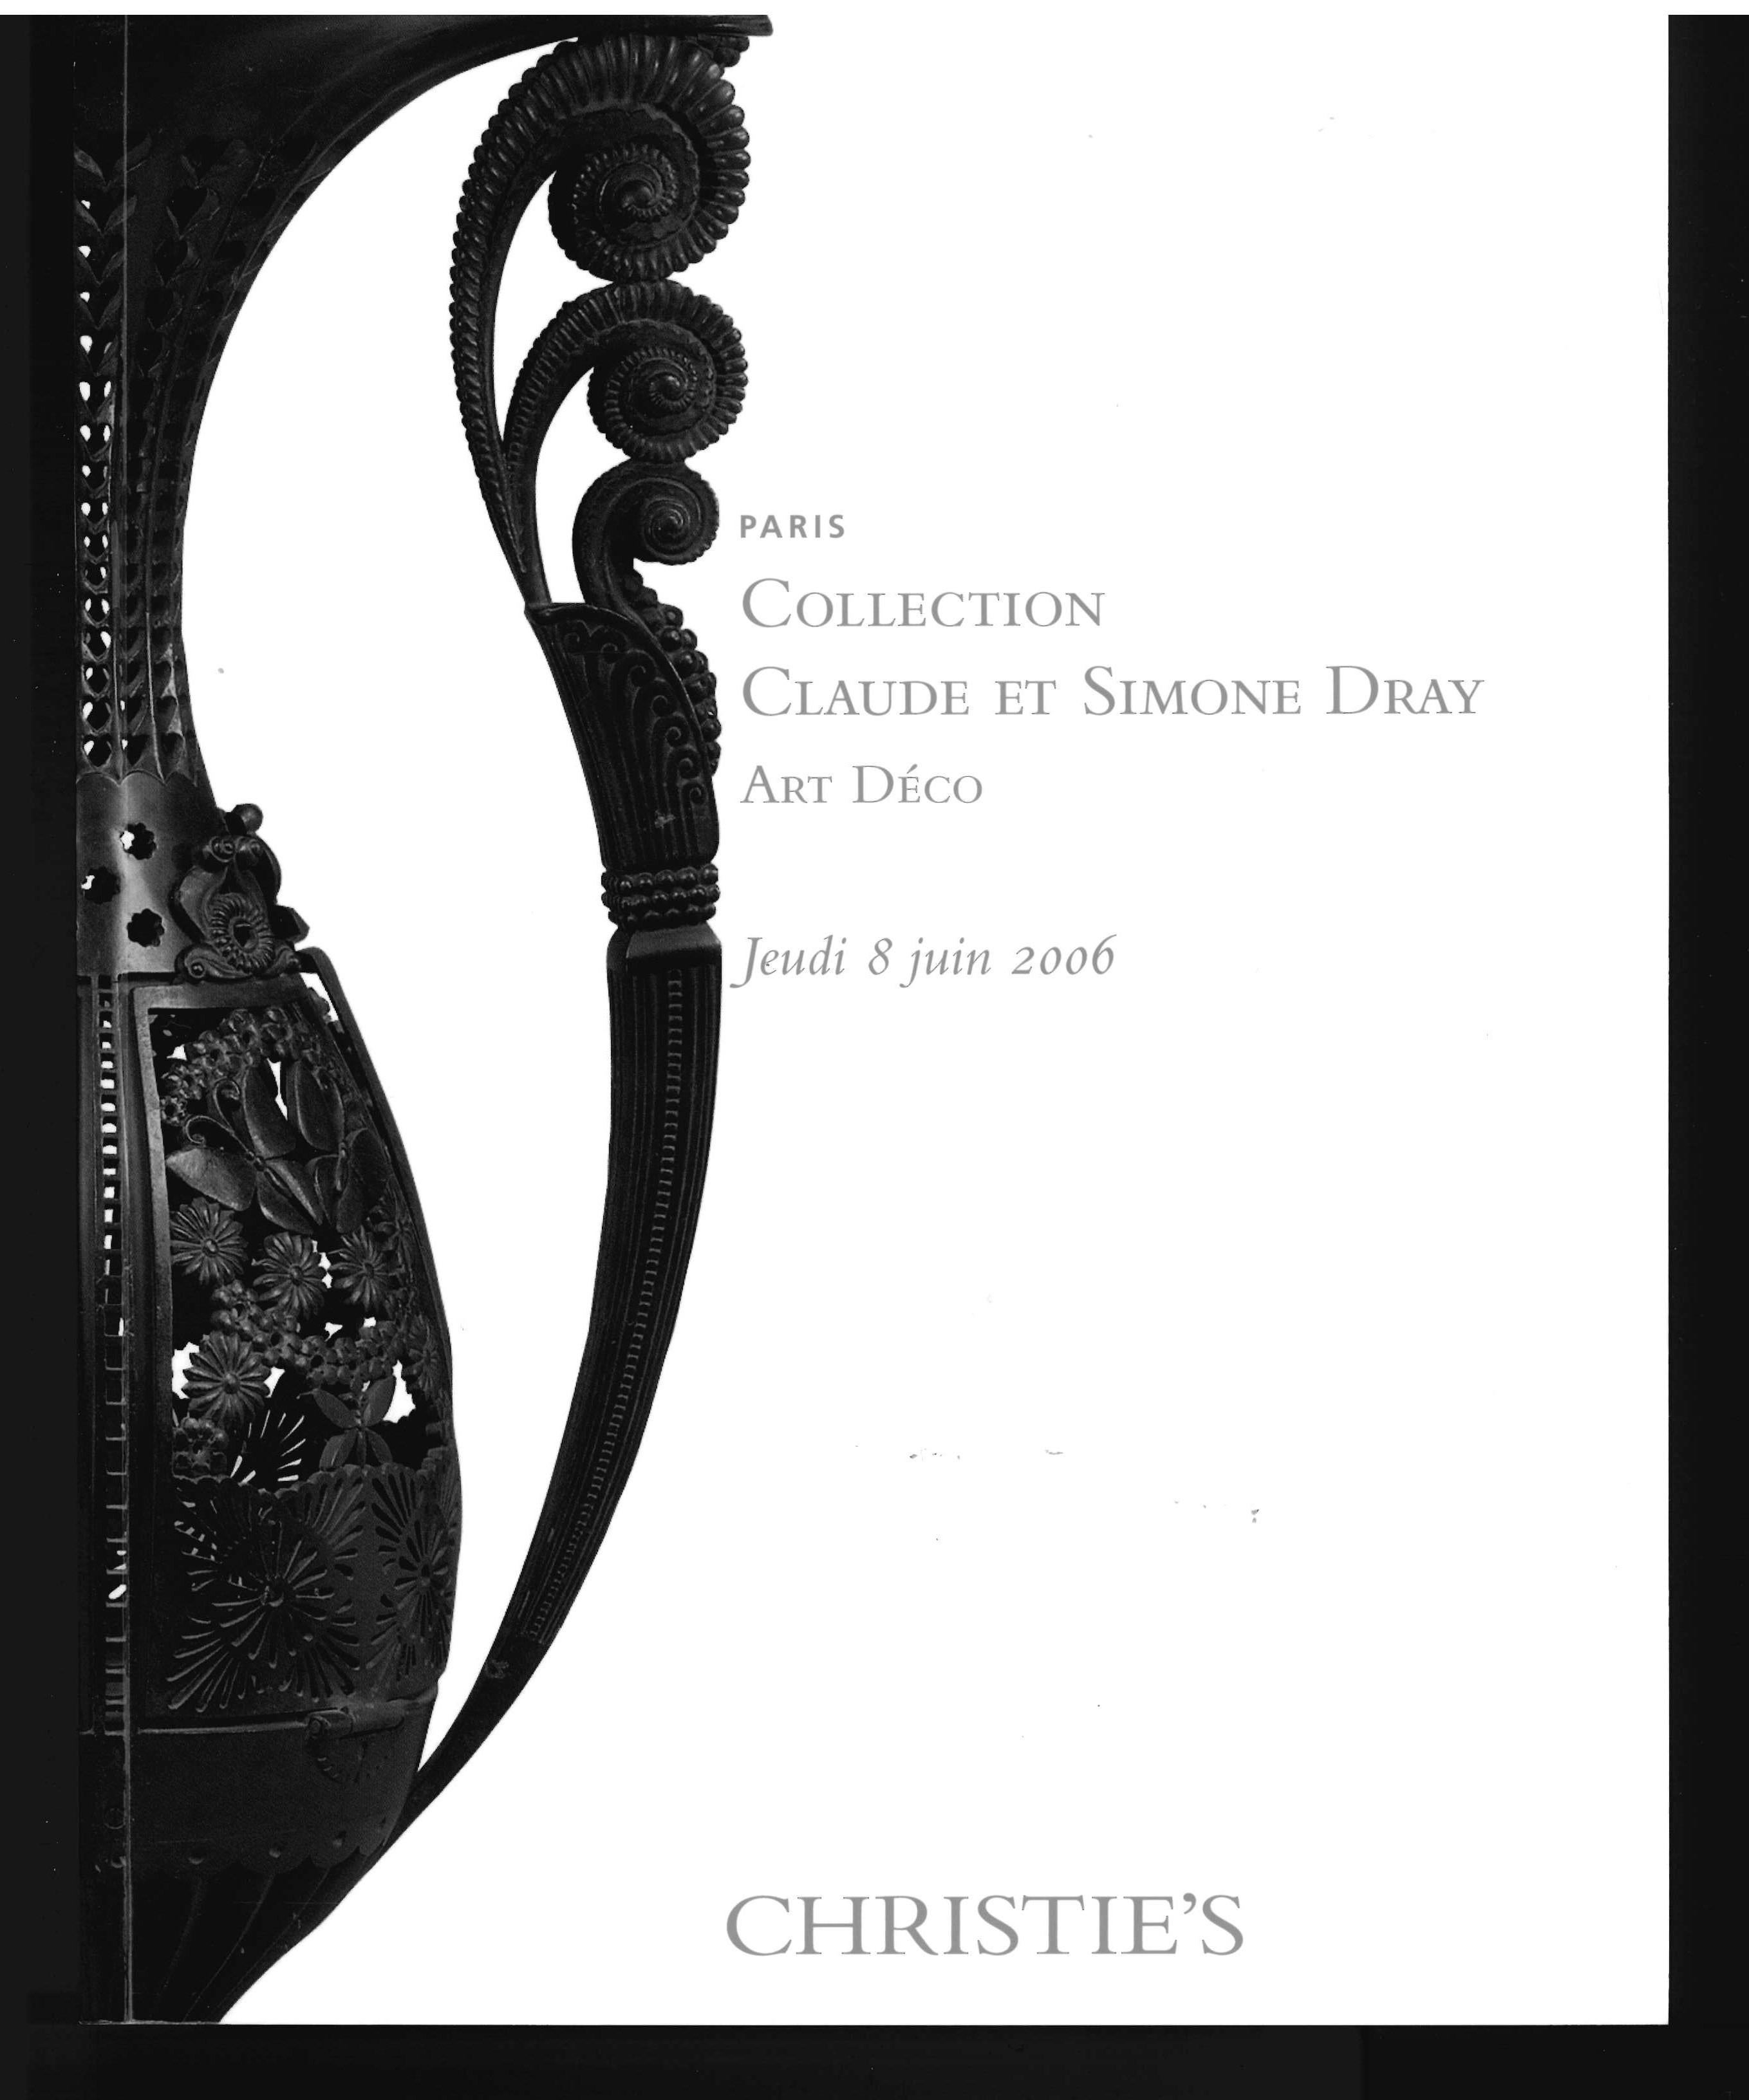 This is a 2 volume set of sales catalogues produced by Christie's in 2006 for the sale of the collection of Claude and Simone Dray. The impressive Art Deco collection of masterpieces ran to 296 lots, all of which are illustrated together with